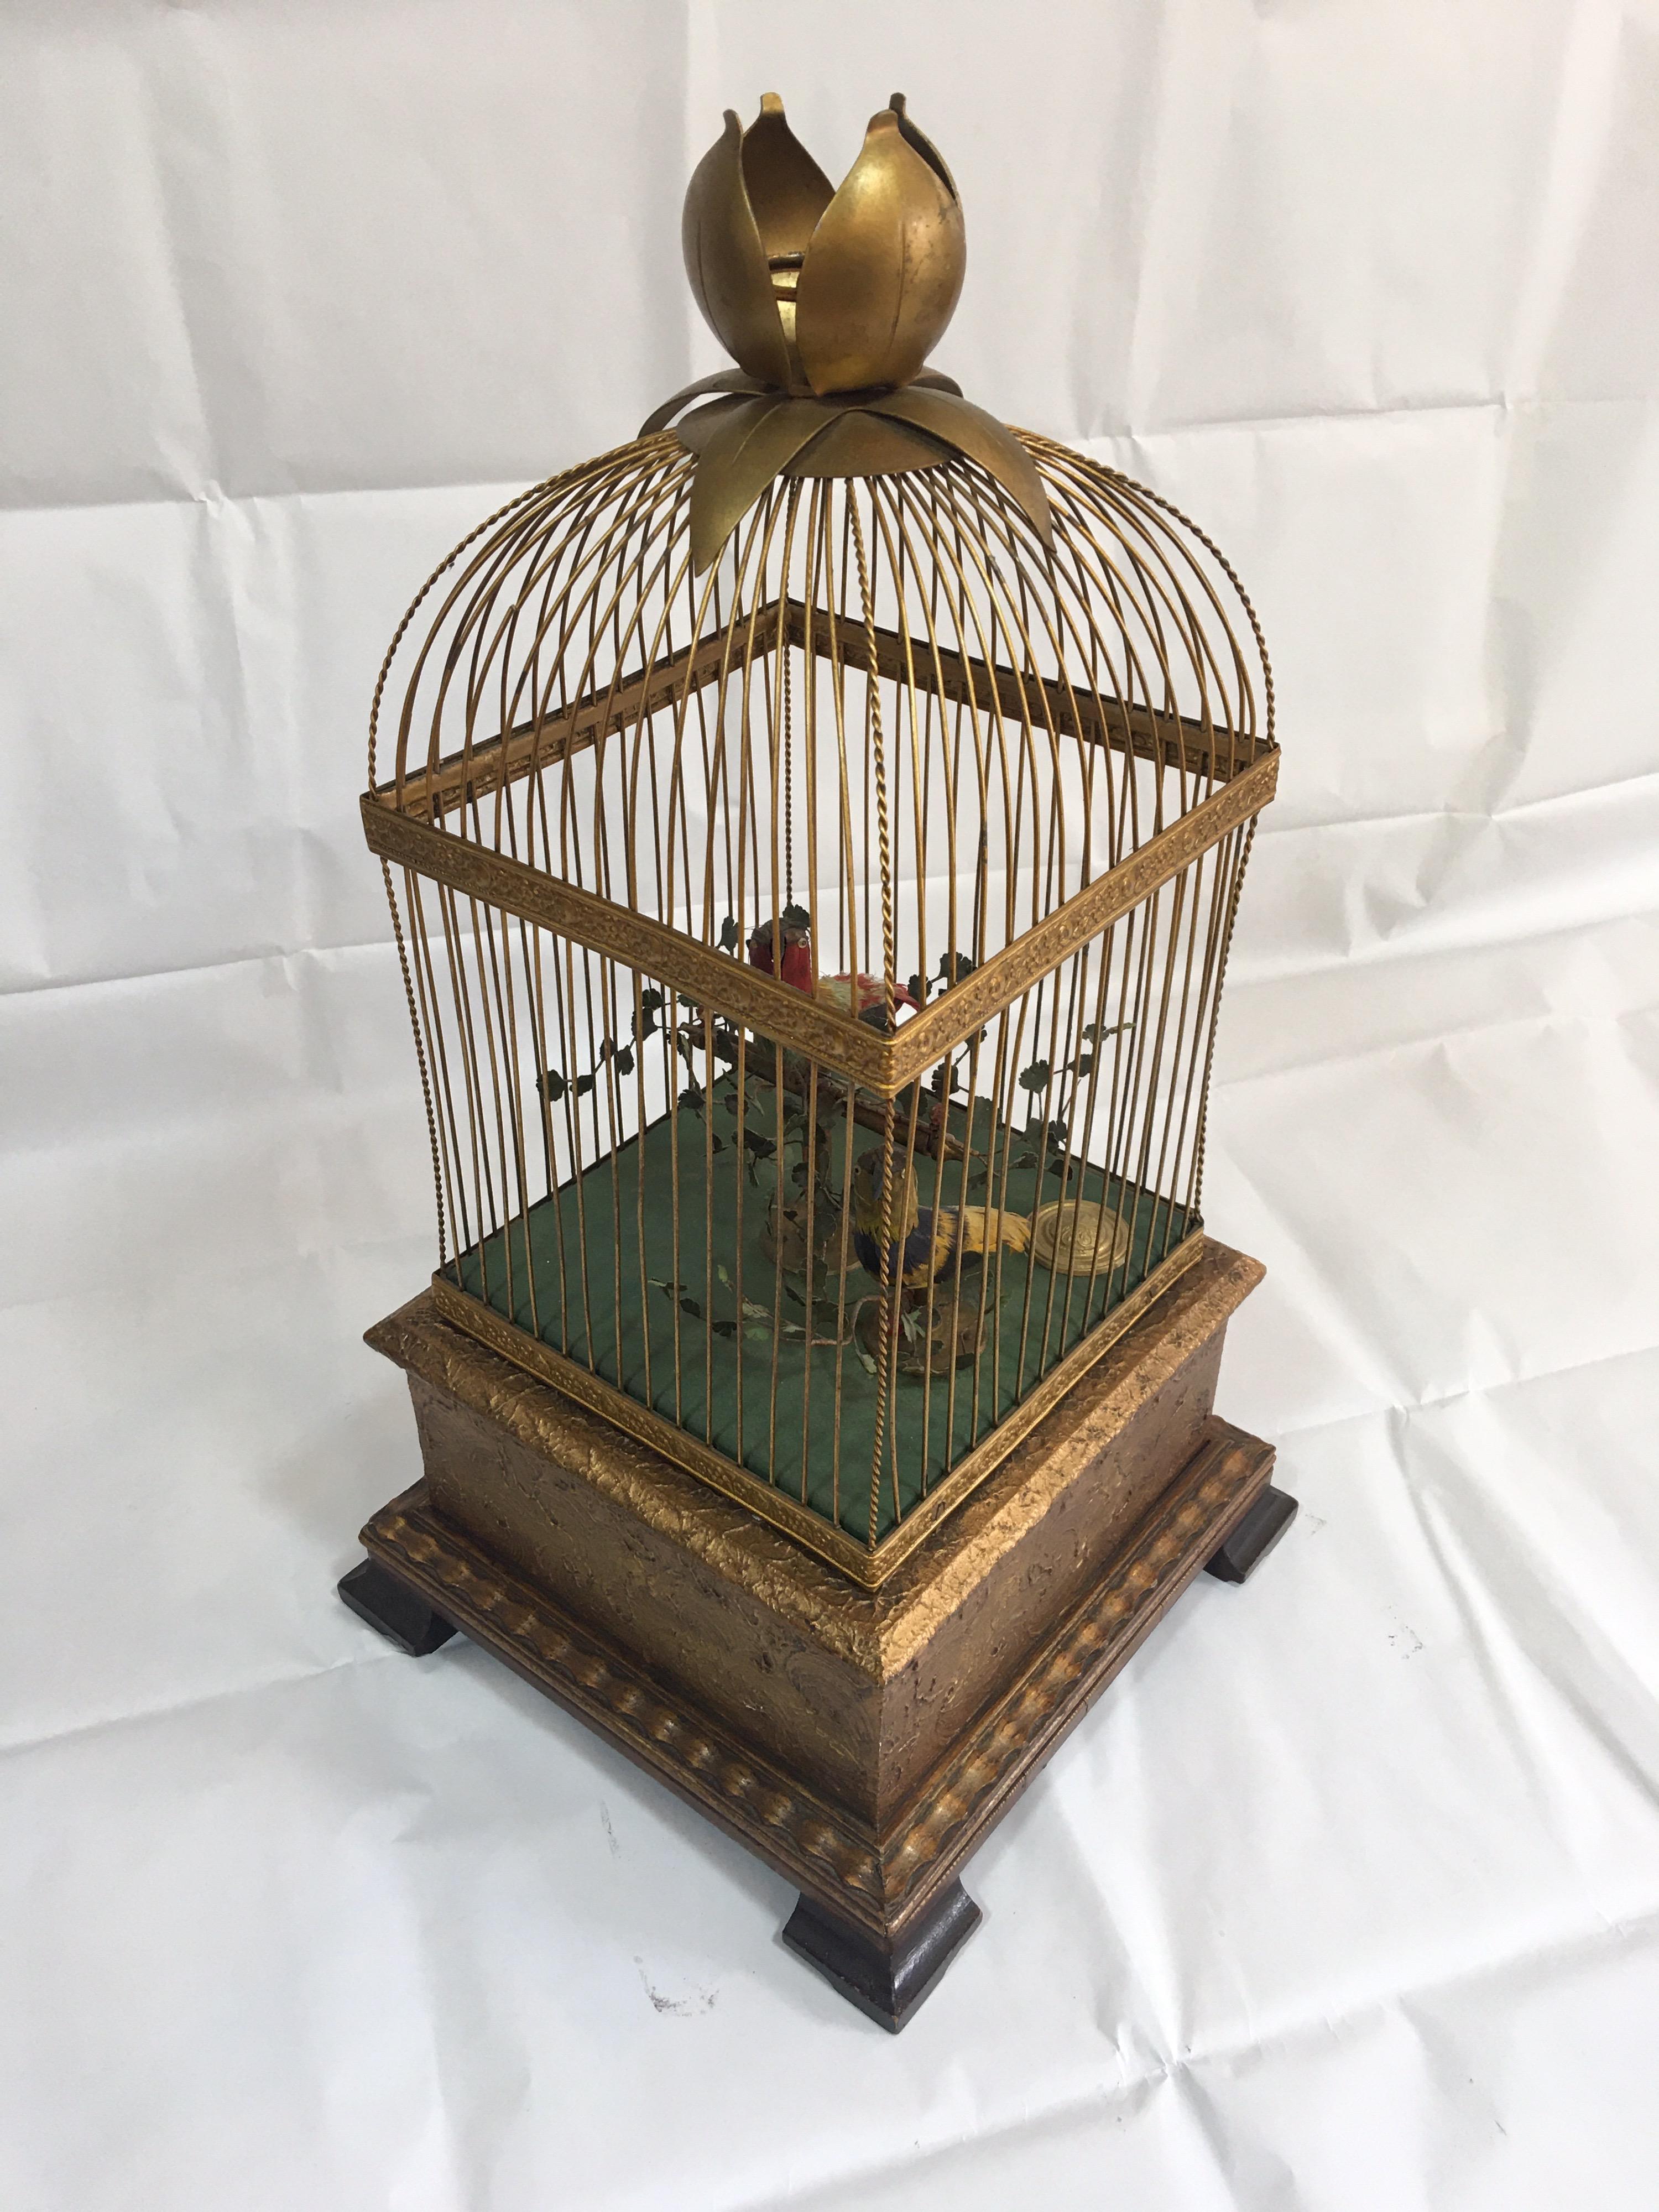 This stunning Victorian period french double singing bird in a cage automation is in good working condition. Each of the brightly coloured birds with feather plumage, with head, beak and tail movements, within a gilt brass cage with control lever to